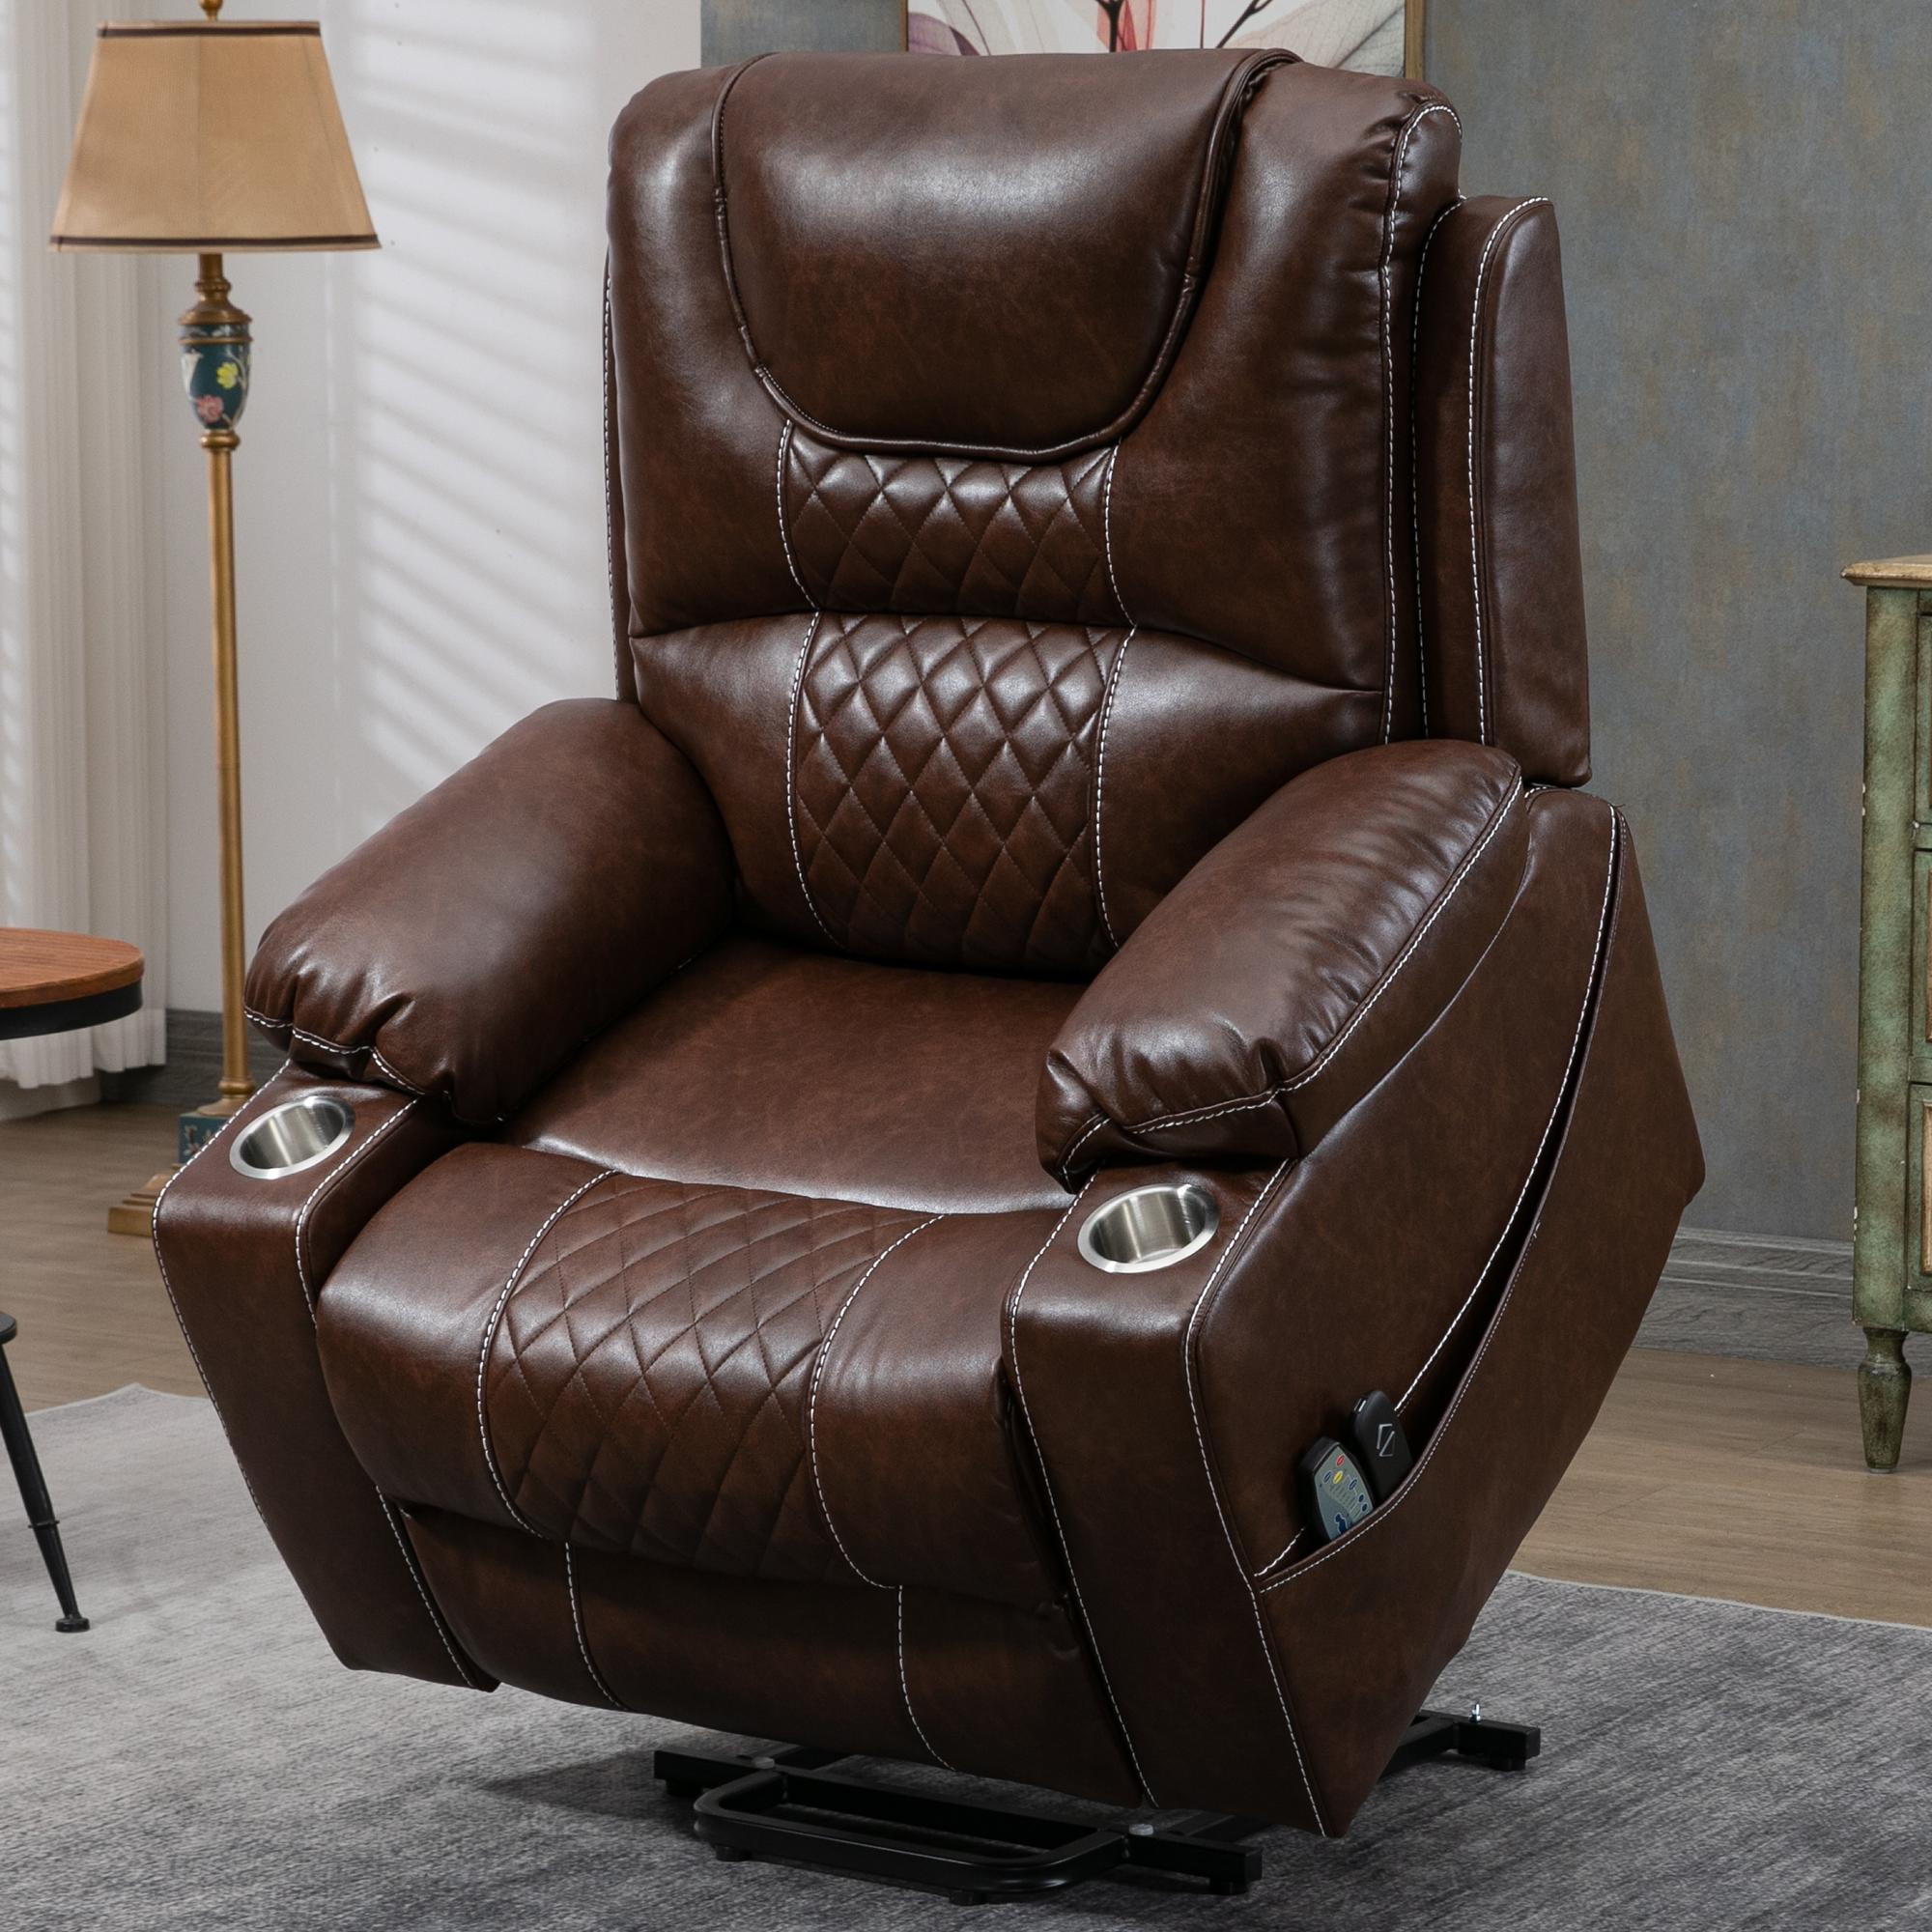 BTMWAY Large Lift Chair with Heated and Massage Functions, Extended ...